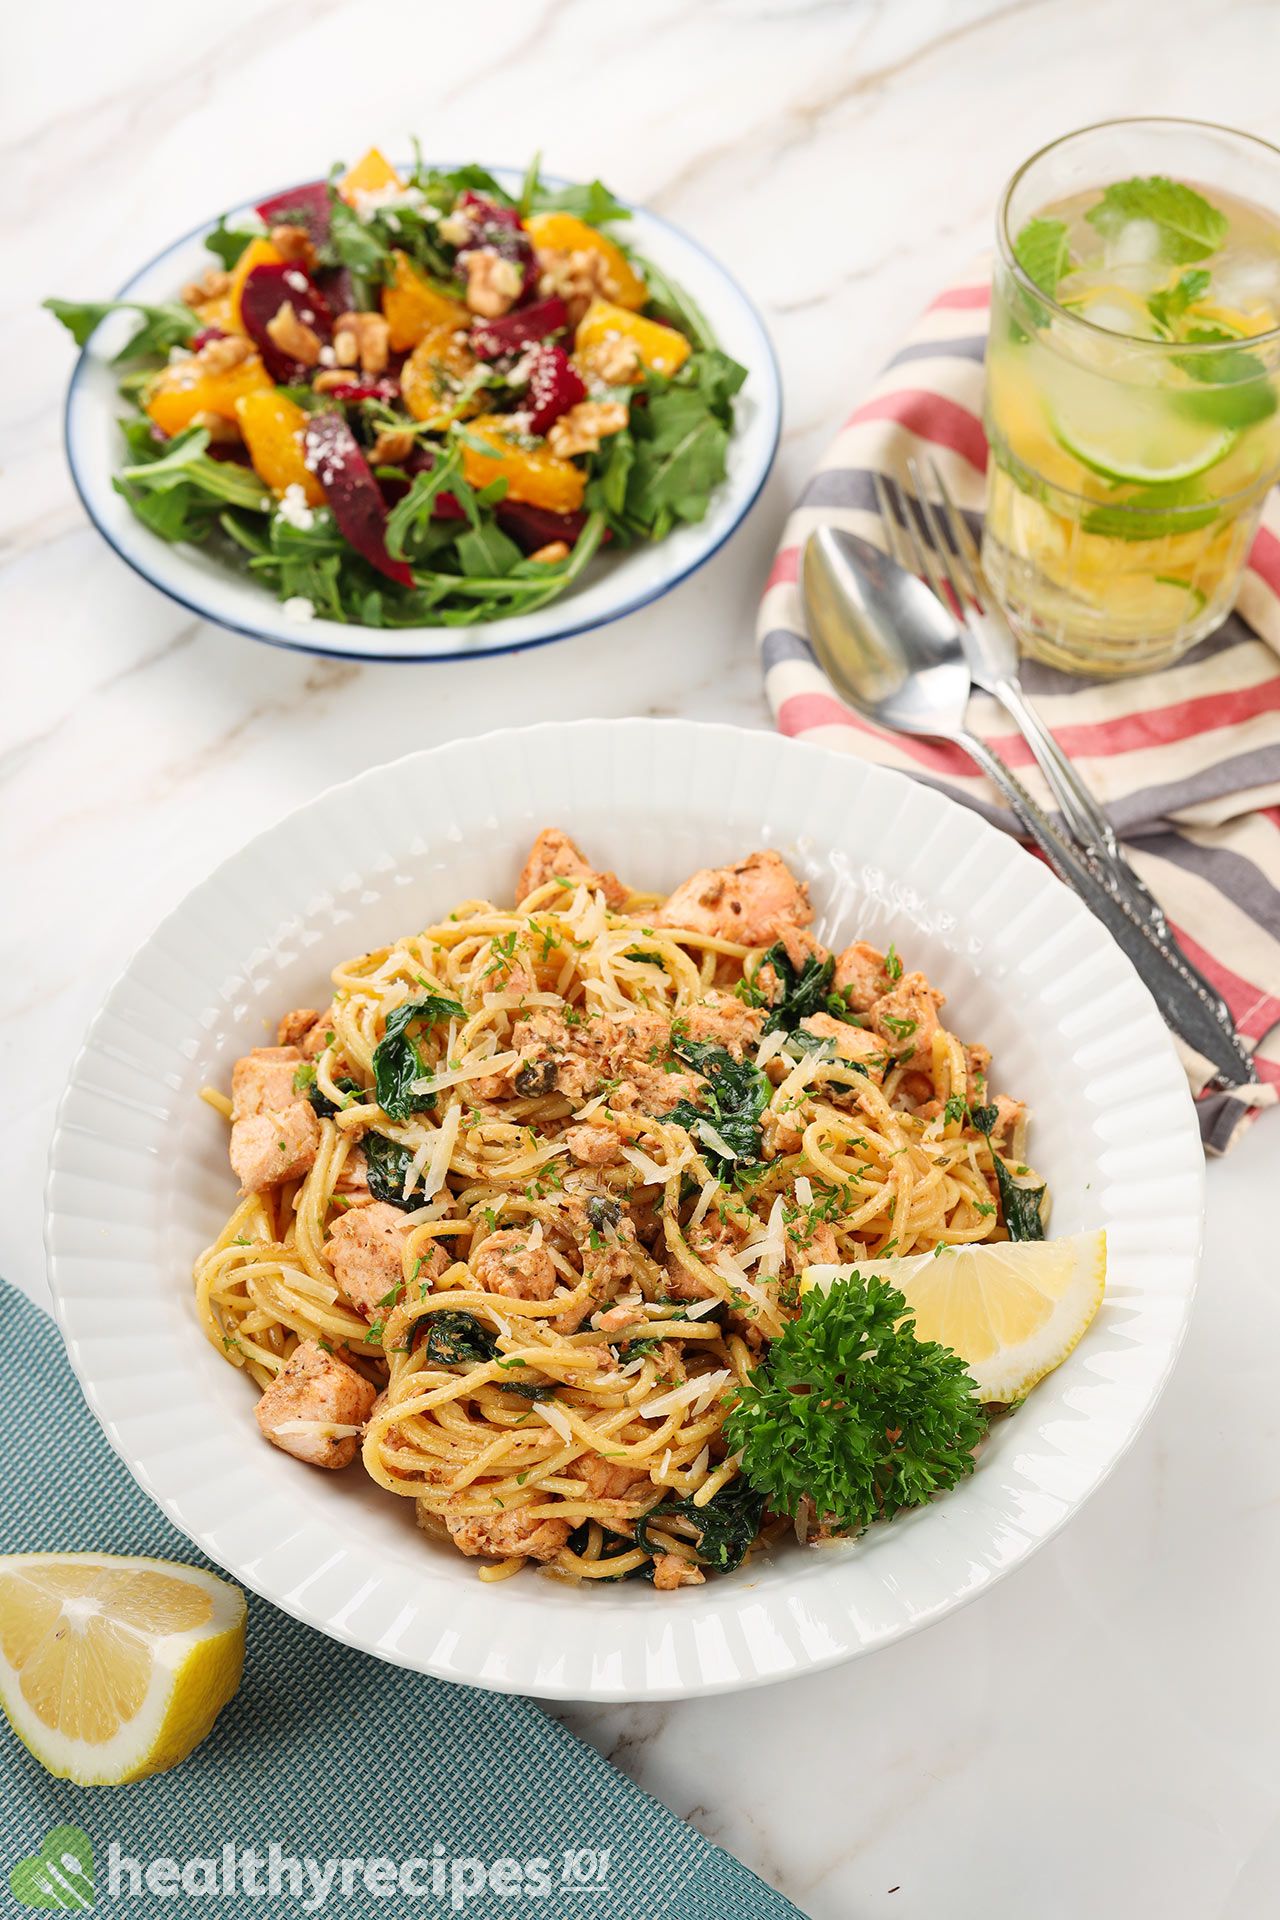 What to Serve With Salmon Pasta